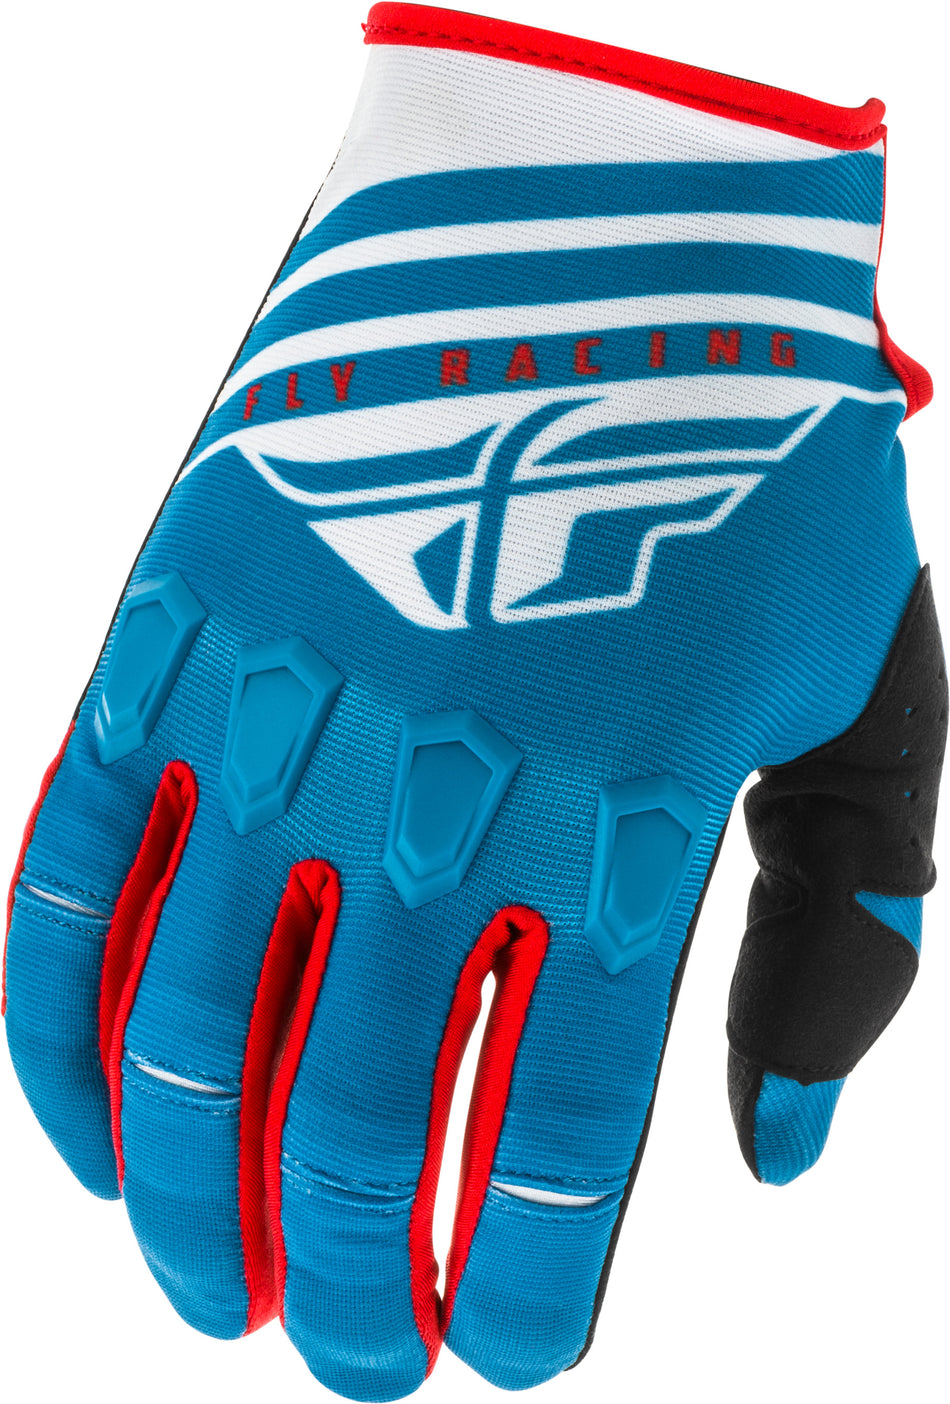 FLY RACING Kinetic K220 Gloves Blue/White/Red Sz 09 373-51109